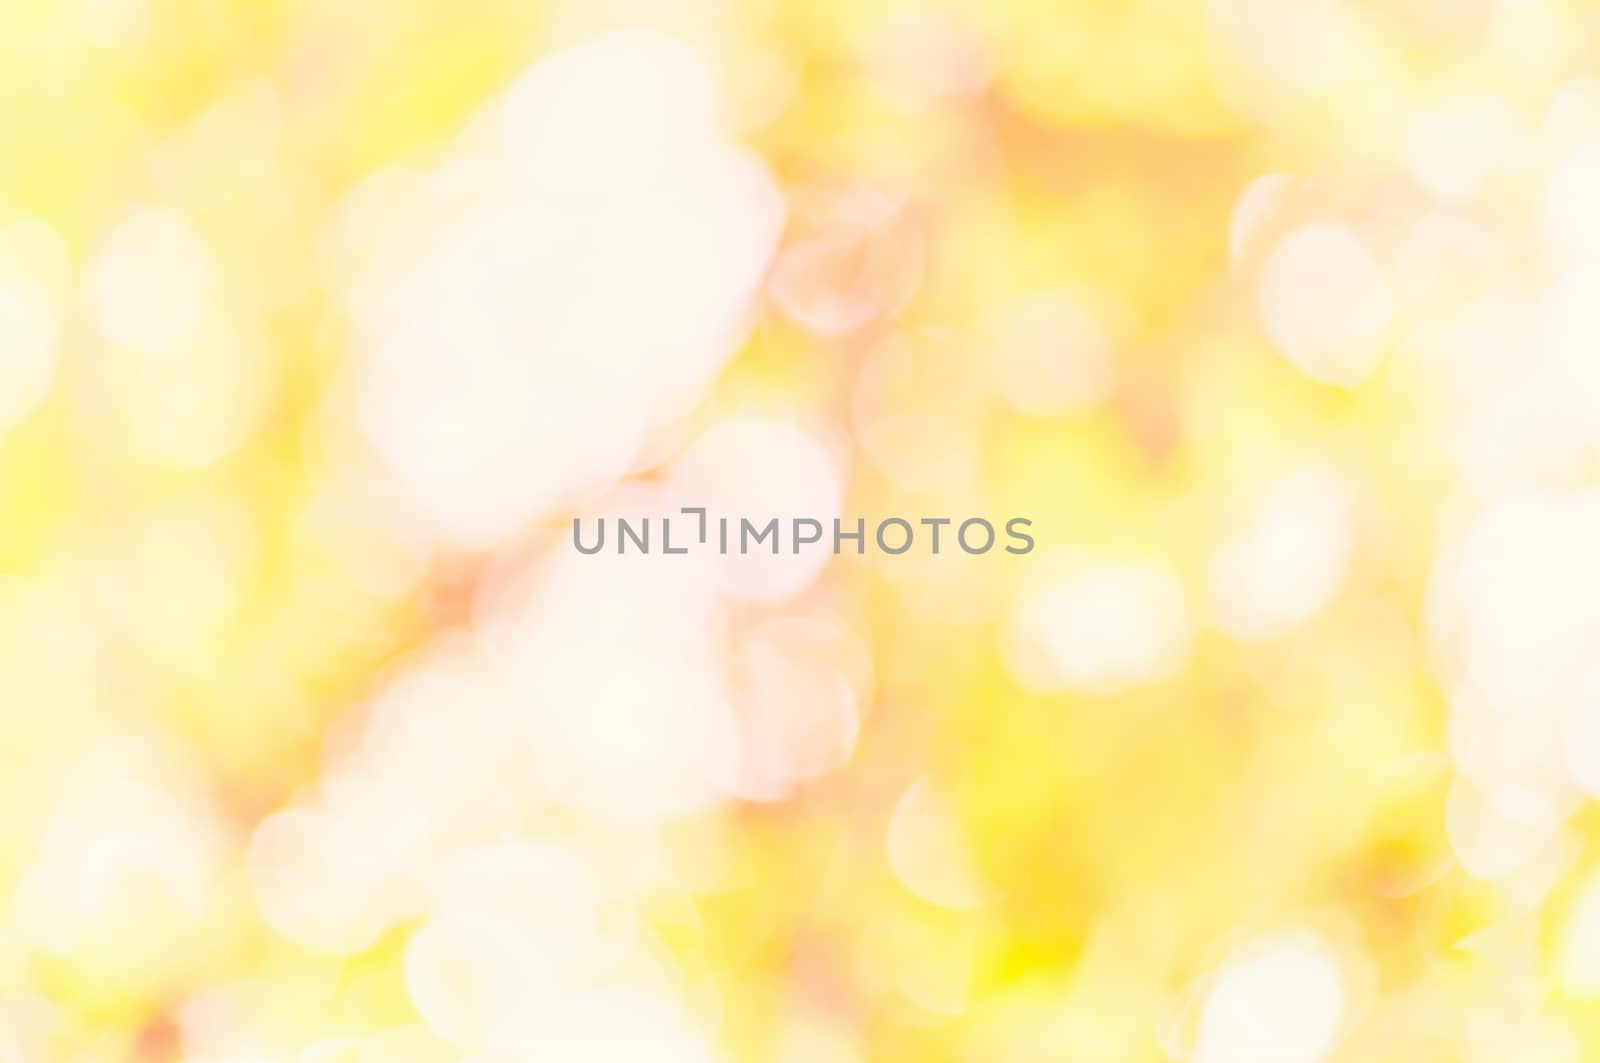 Orange color bokeh. Gold abstract christmas background